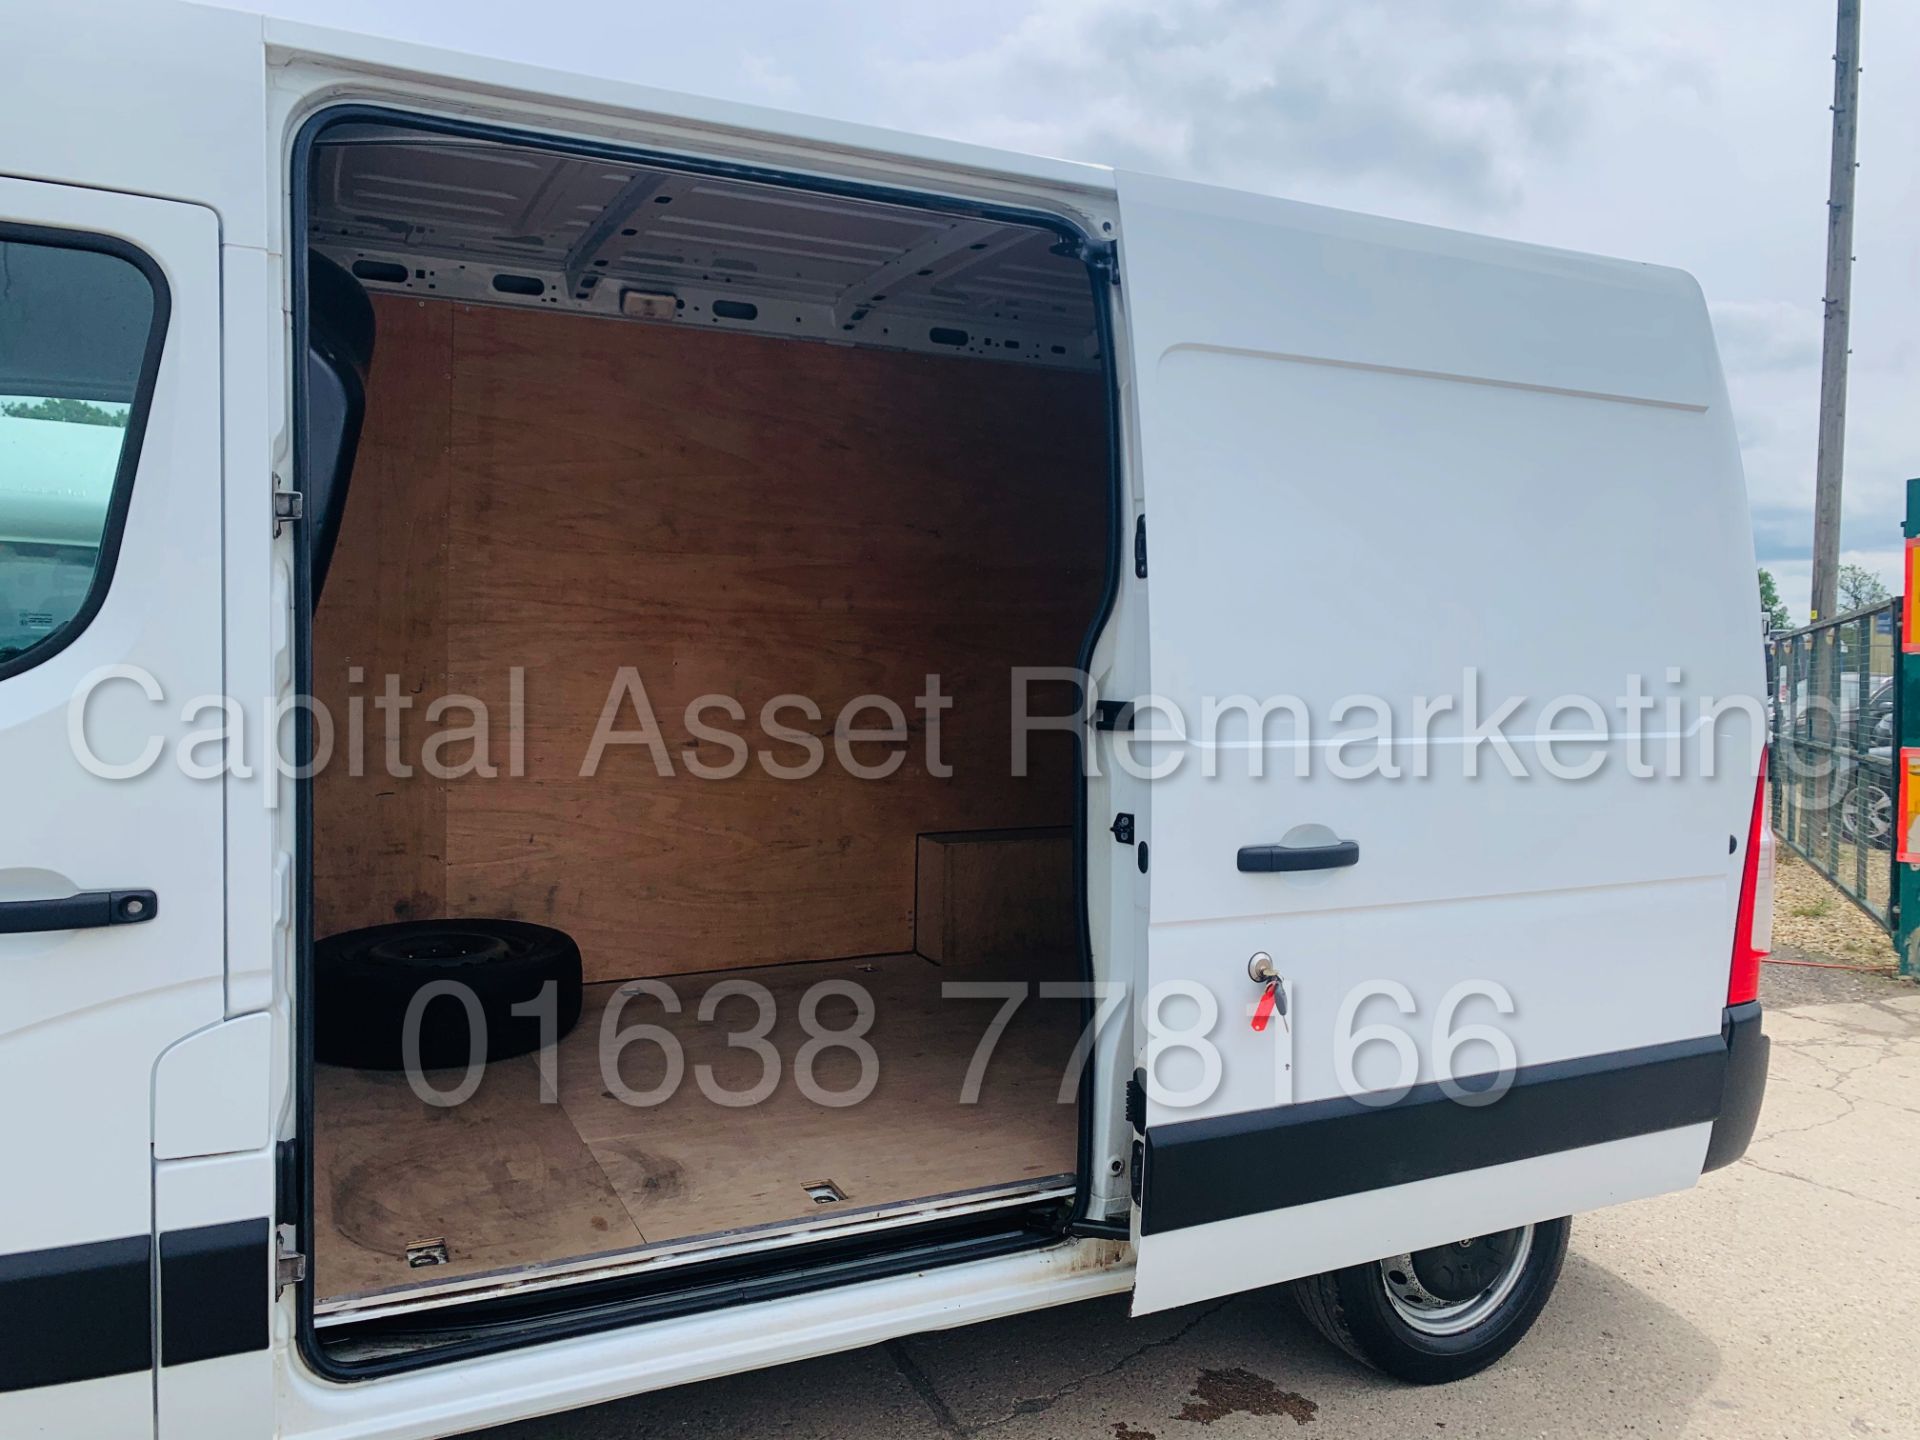 (ON SALE) VAUXHALL MOVANO *MWB HI-ROOF* (2018 - EURO 6) '2.3 CDTI - 130 BHP - 6 SPEED' (1 OWNER) - Image 23 of 39